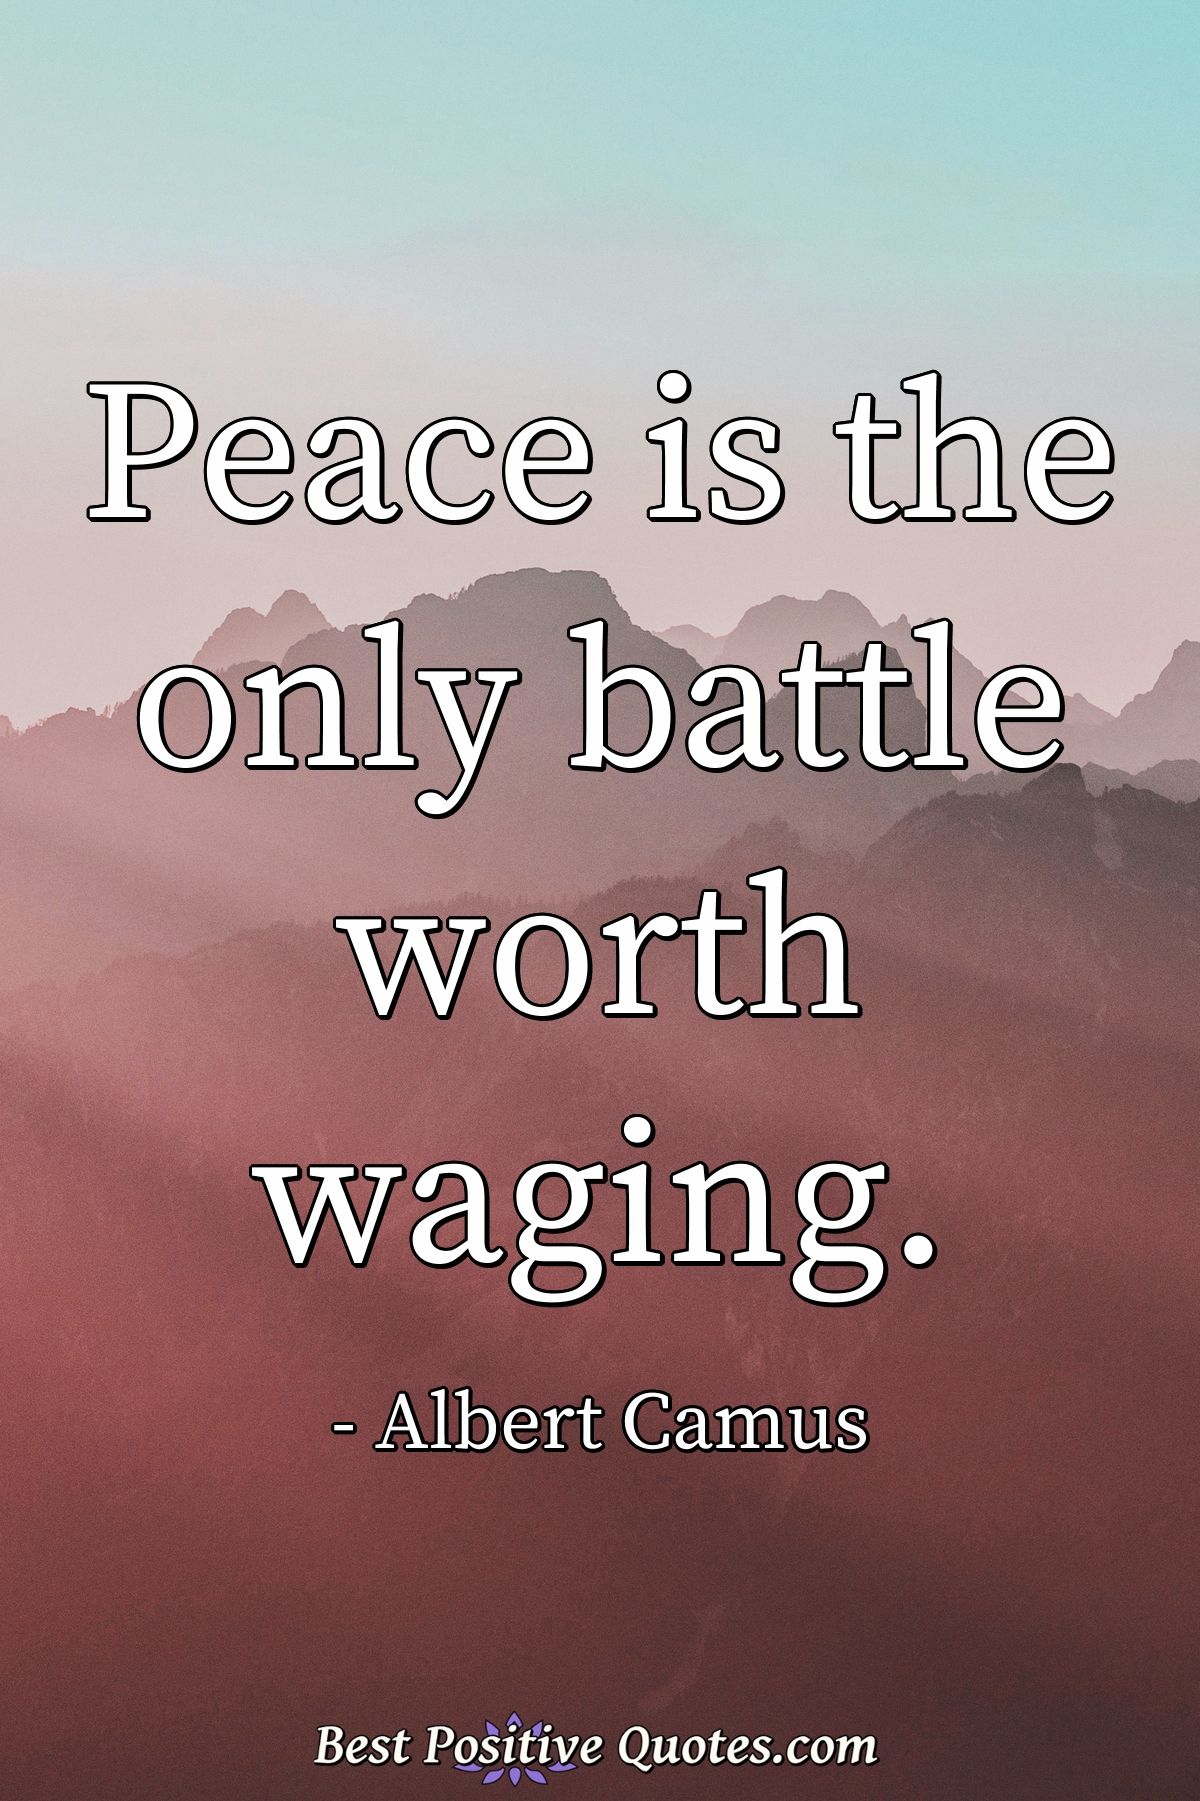 Peace is the only battle worth waging. - Albert Camus